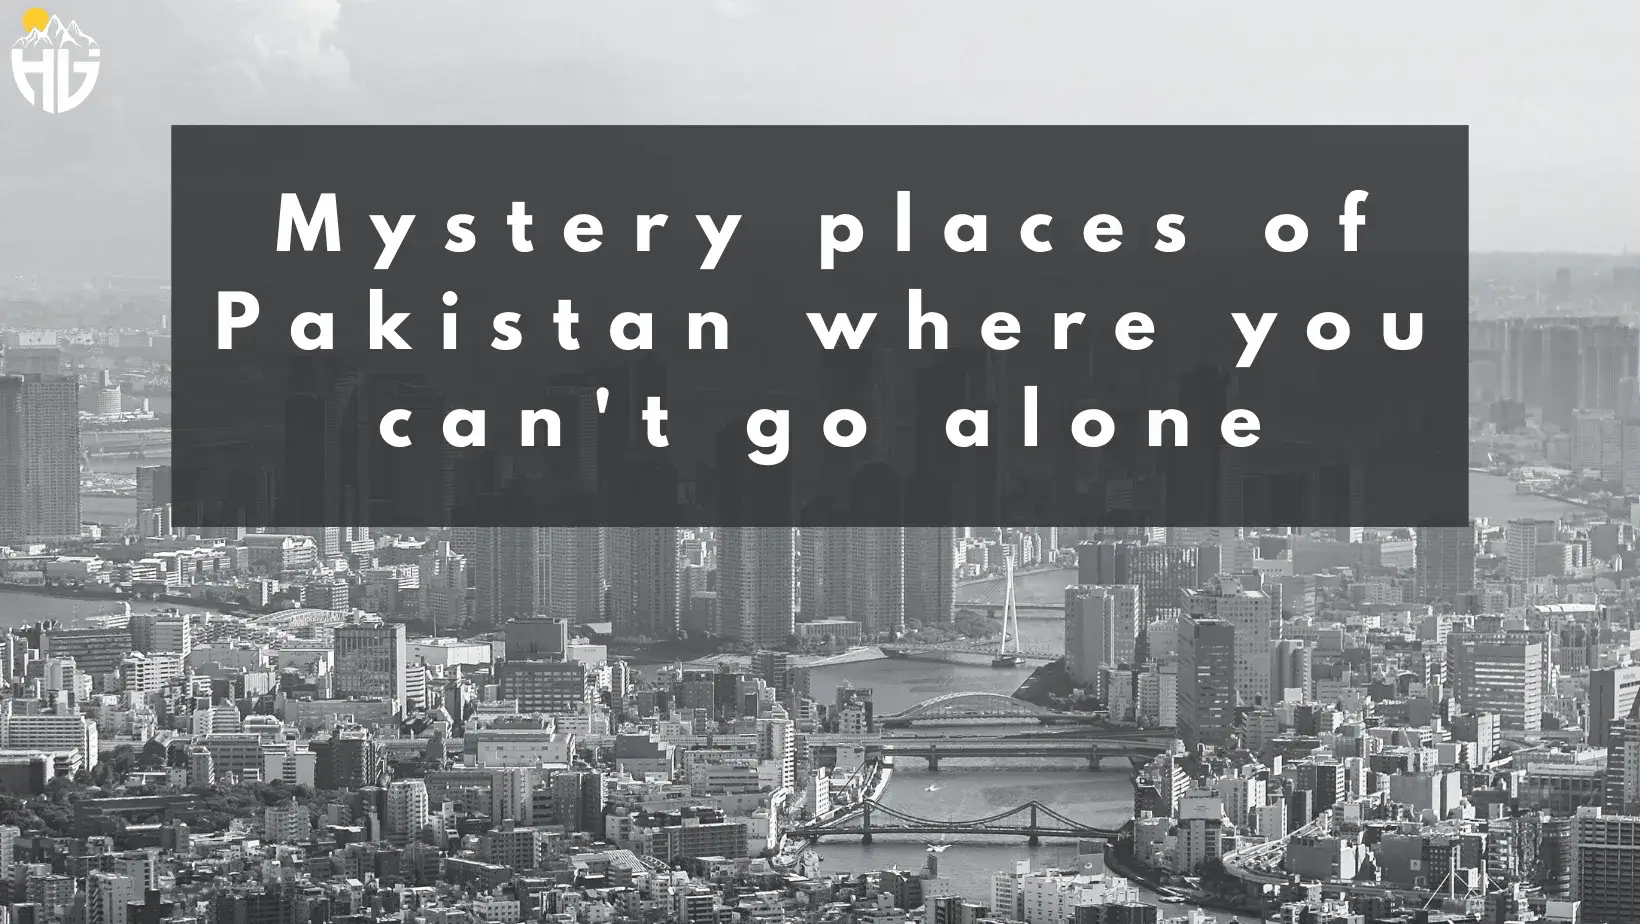 Mystery places of Pakistan where you can't go alone